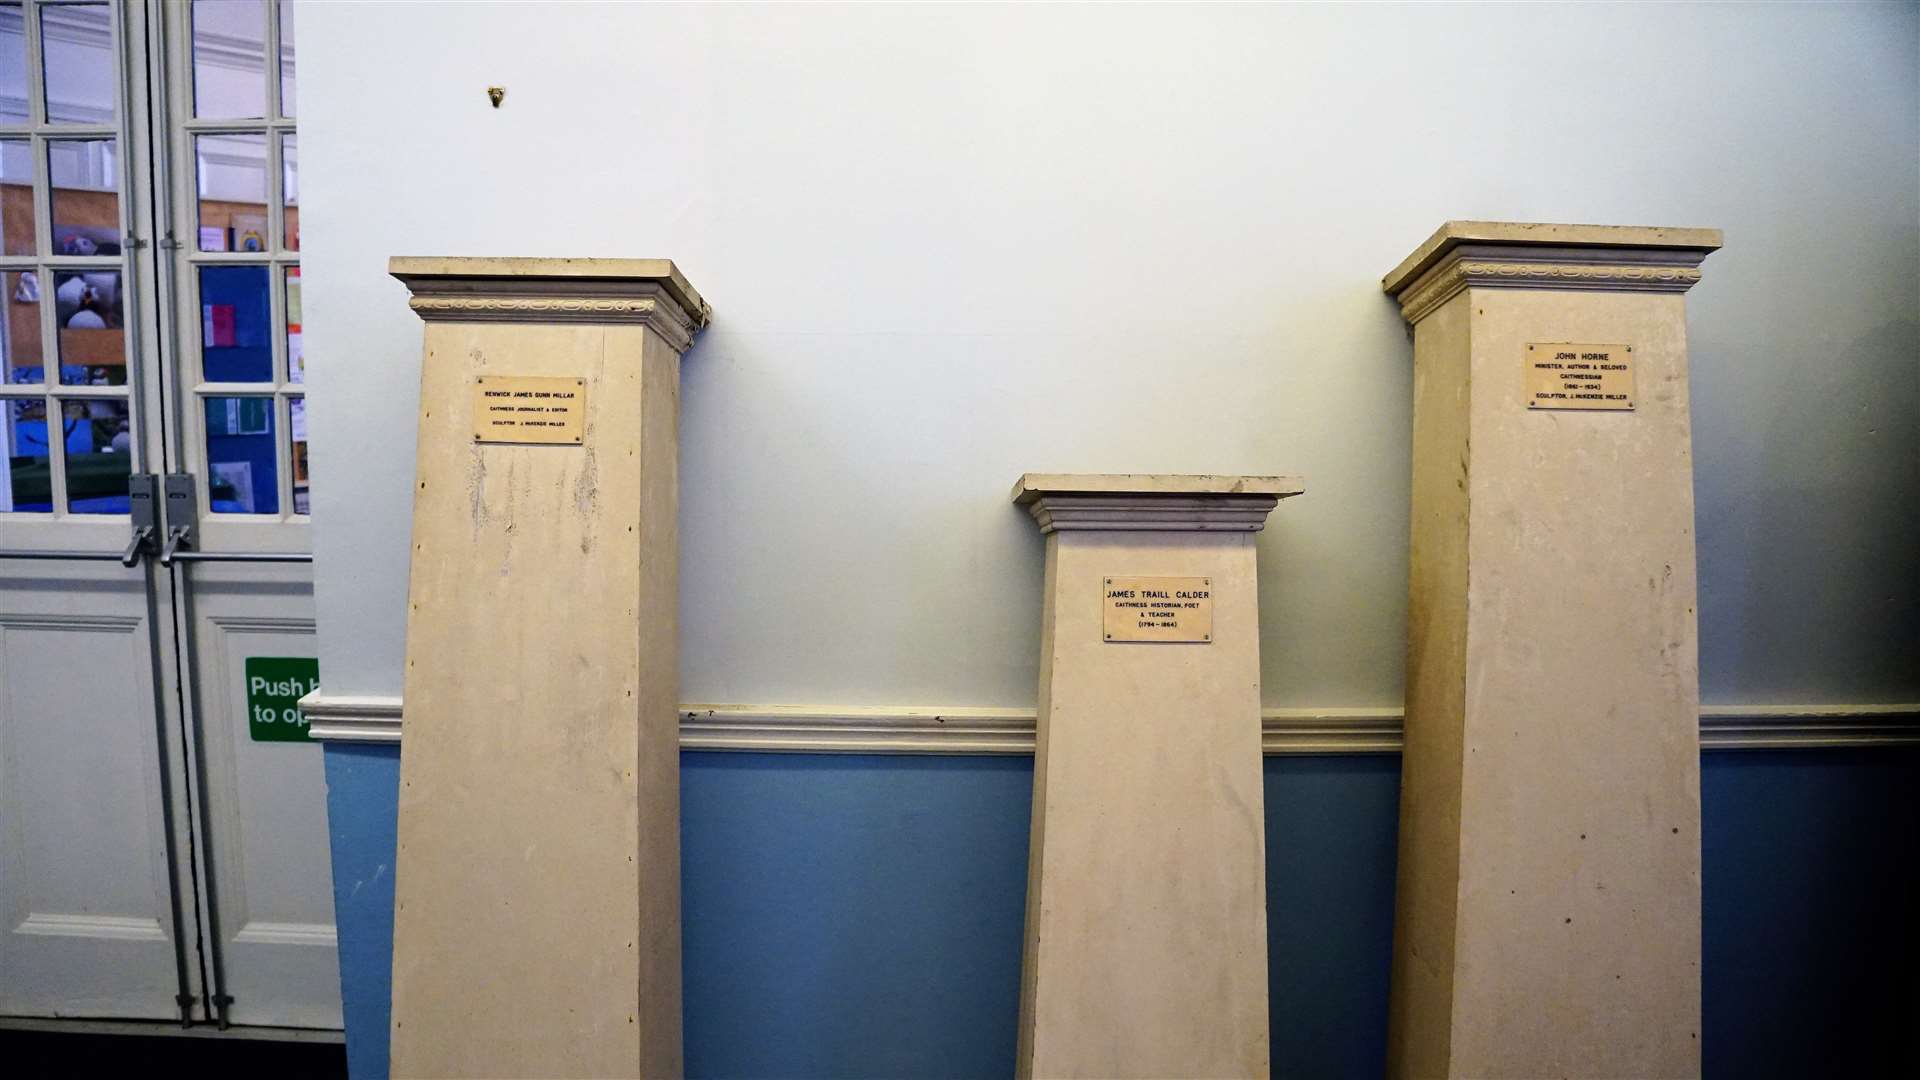 These pedestals were stored alongside the statues and are in need of restoration. Picture: DGS